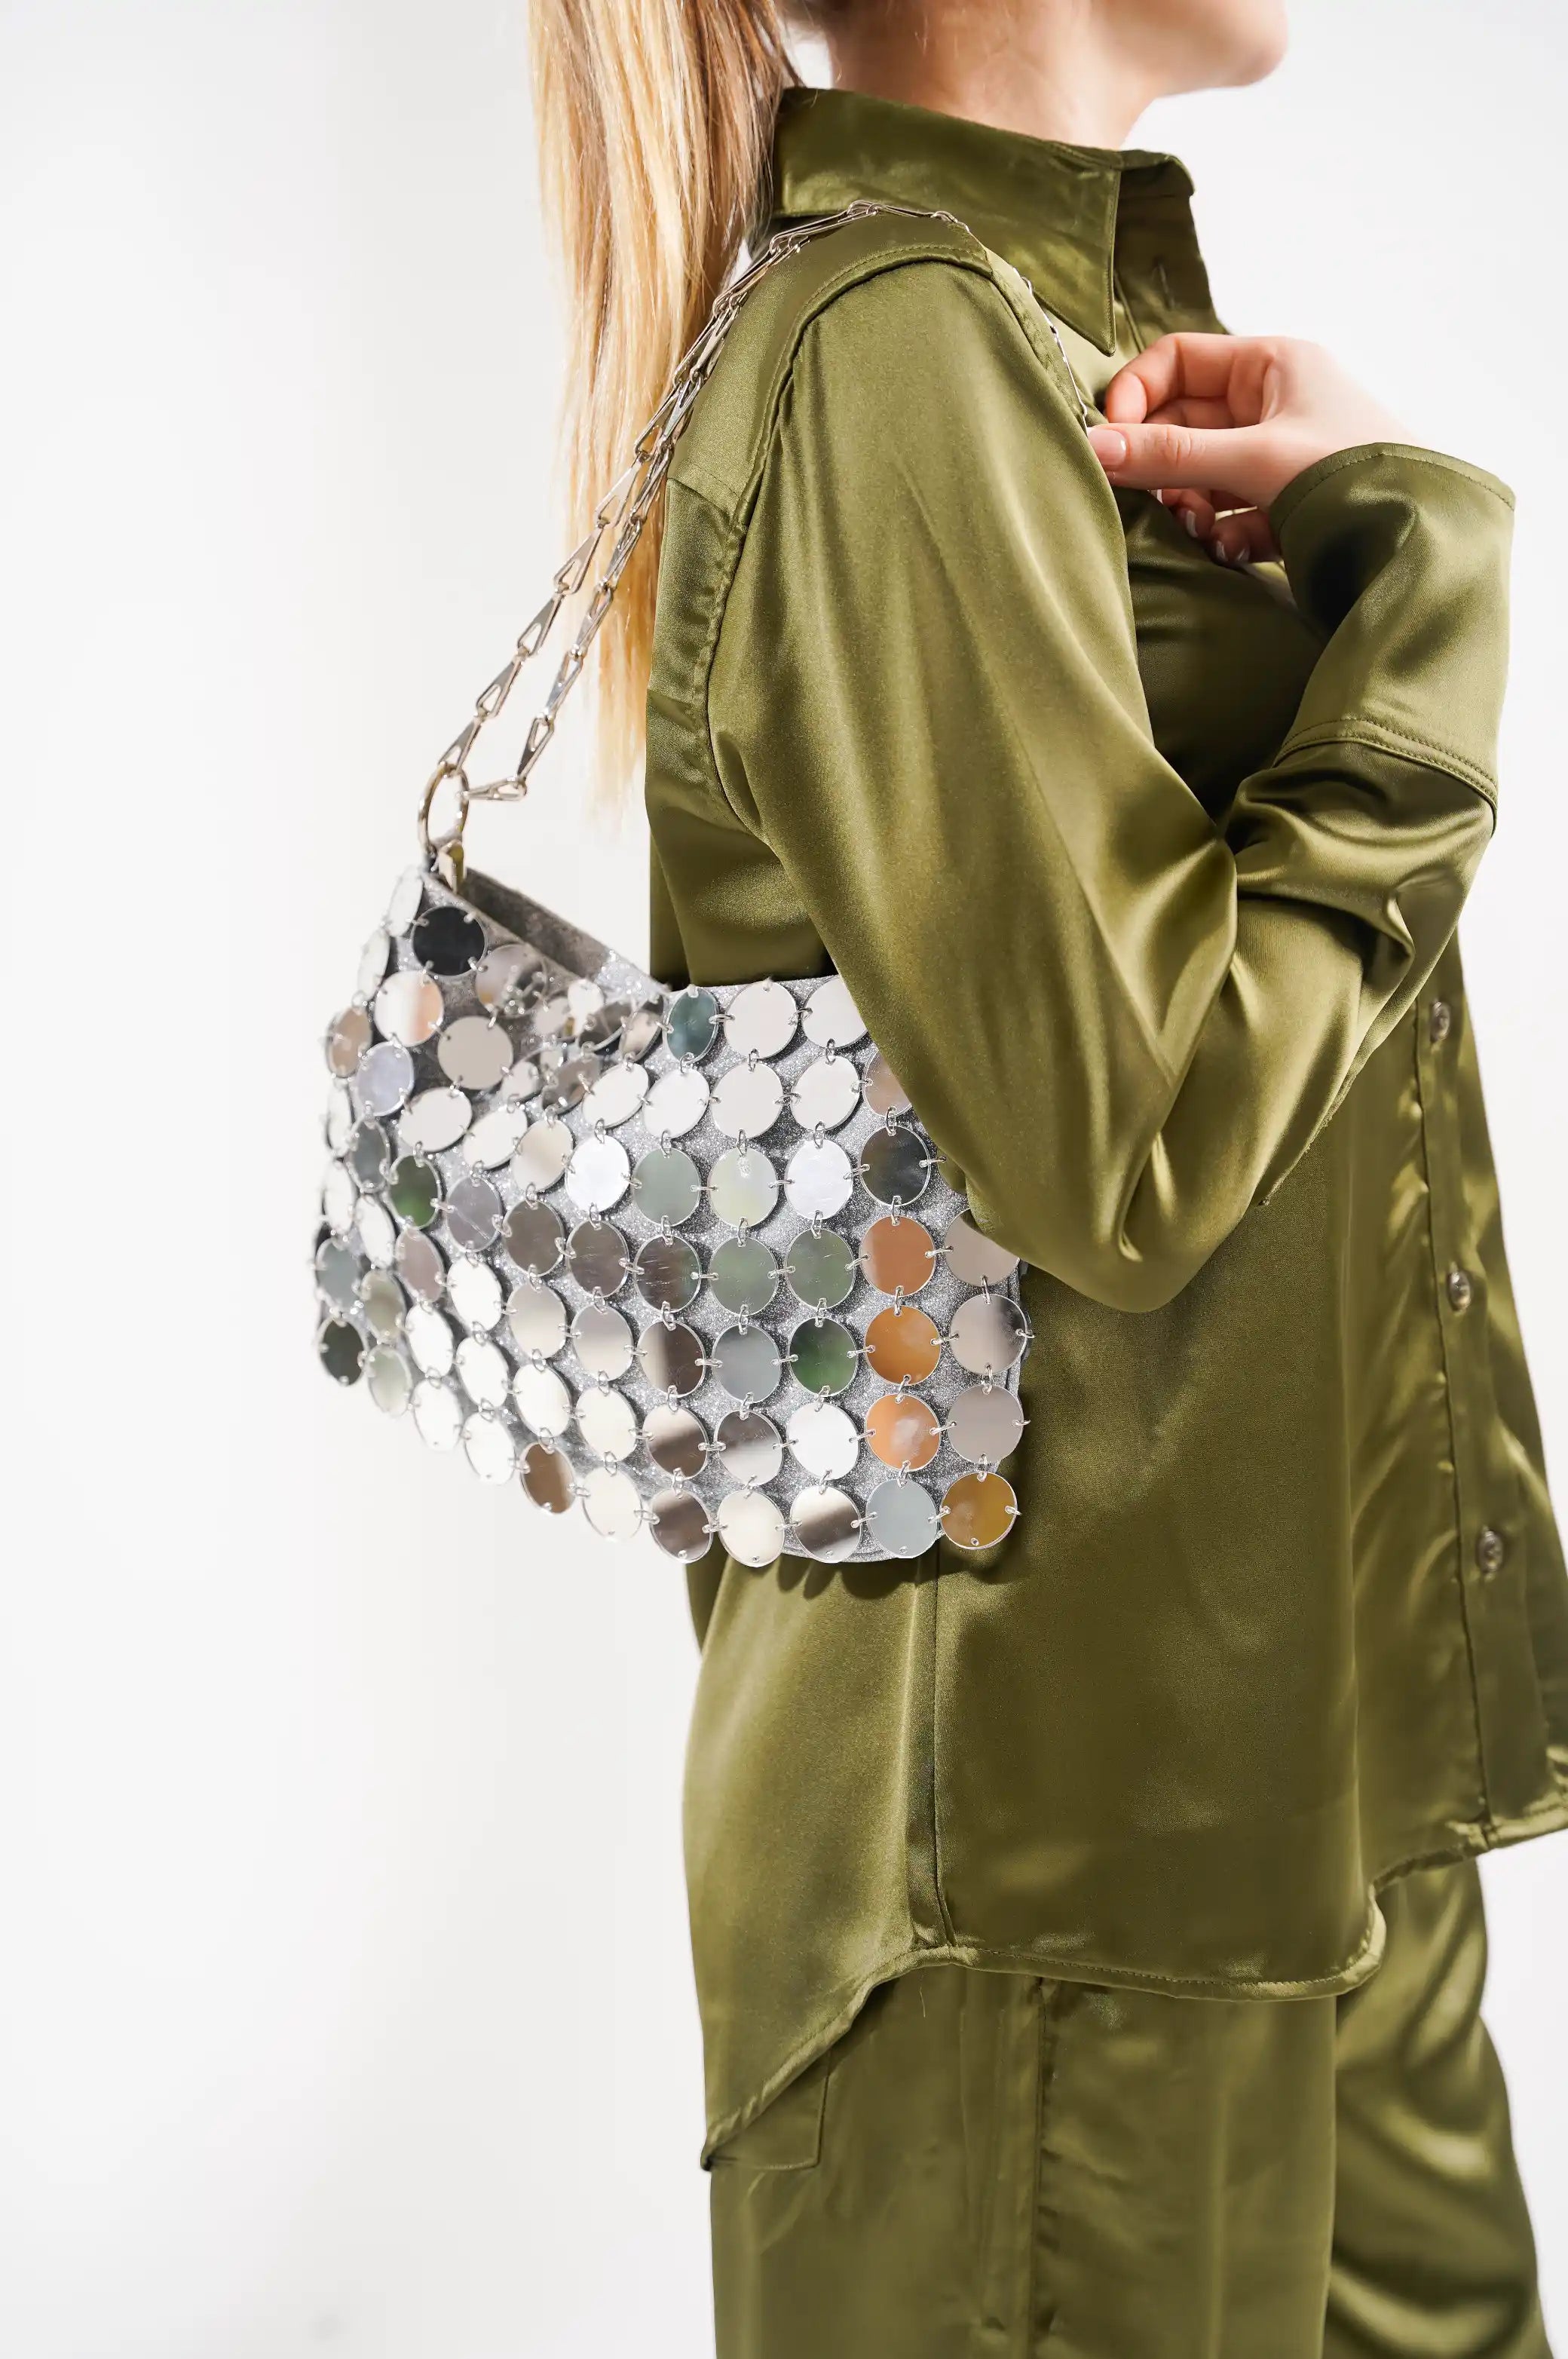 What are some fancy sequin bags/purses? | PurseForum